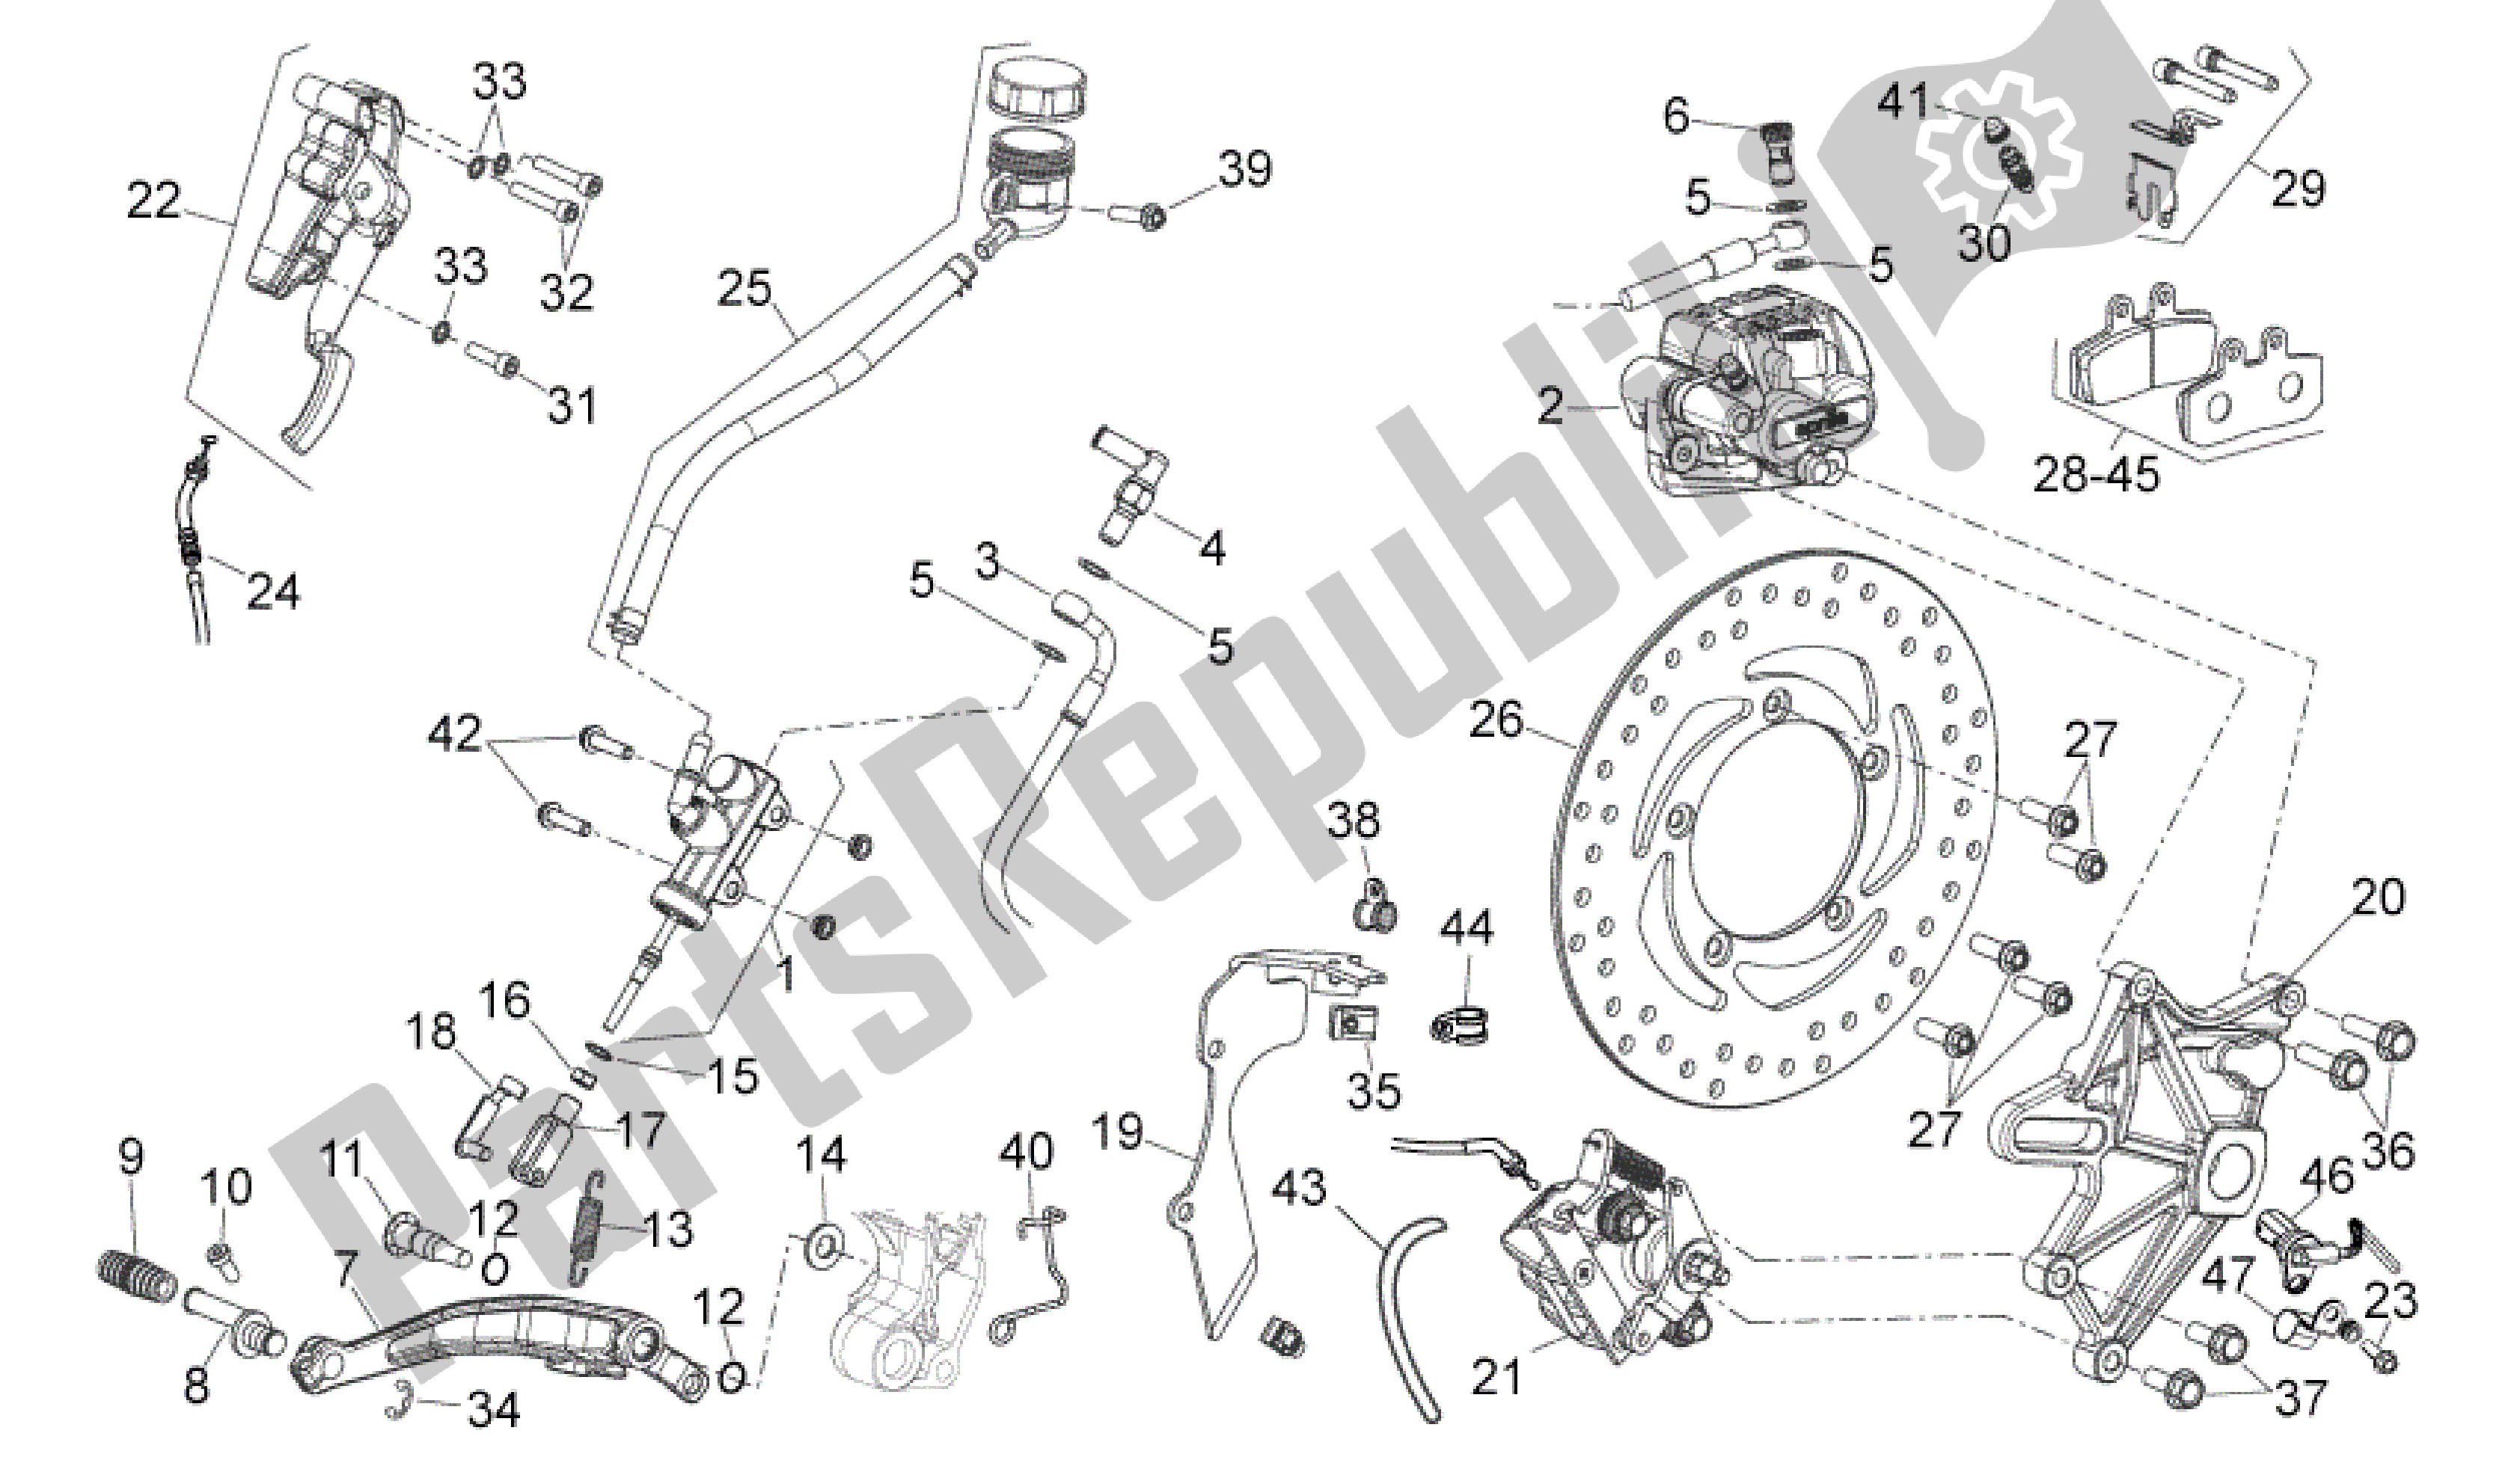 All parts for the Rear Brake System of the Aprilia Mana 850 2007 - 2011